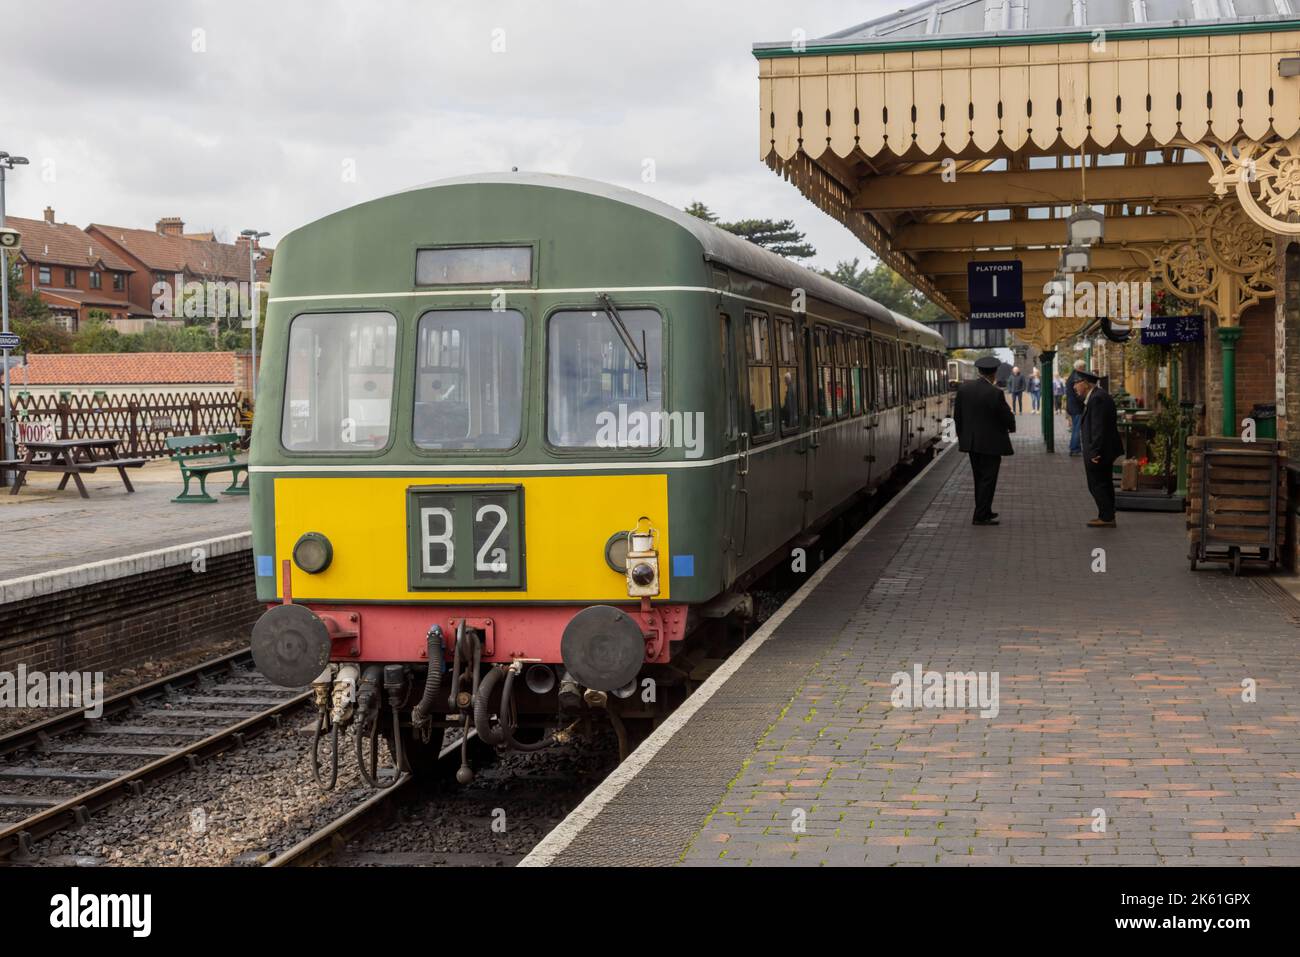 Preserved Class 101 Diesel Multiple Unit (DMU) at Sheringham Station on the North Norfolk Railway Stock Photo